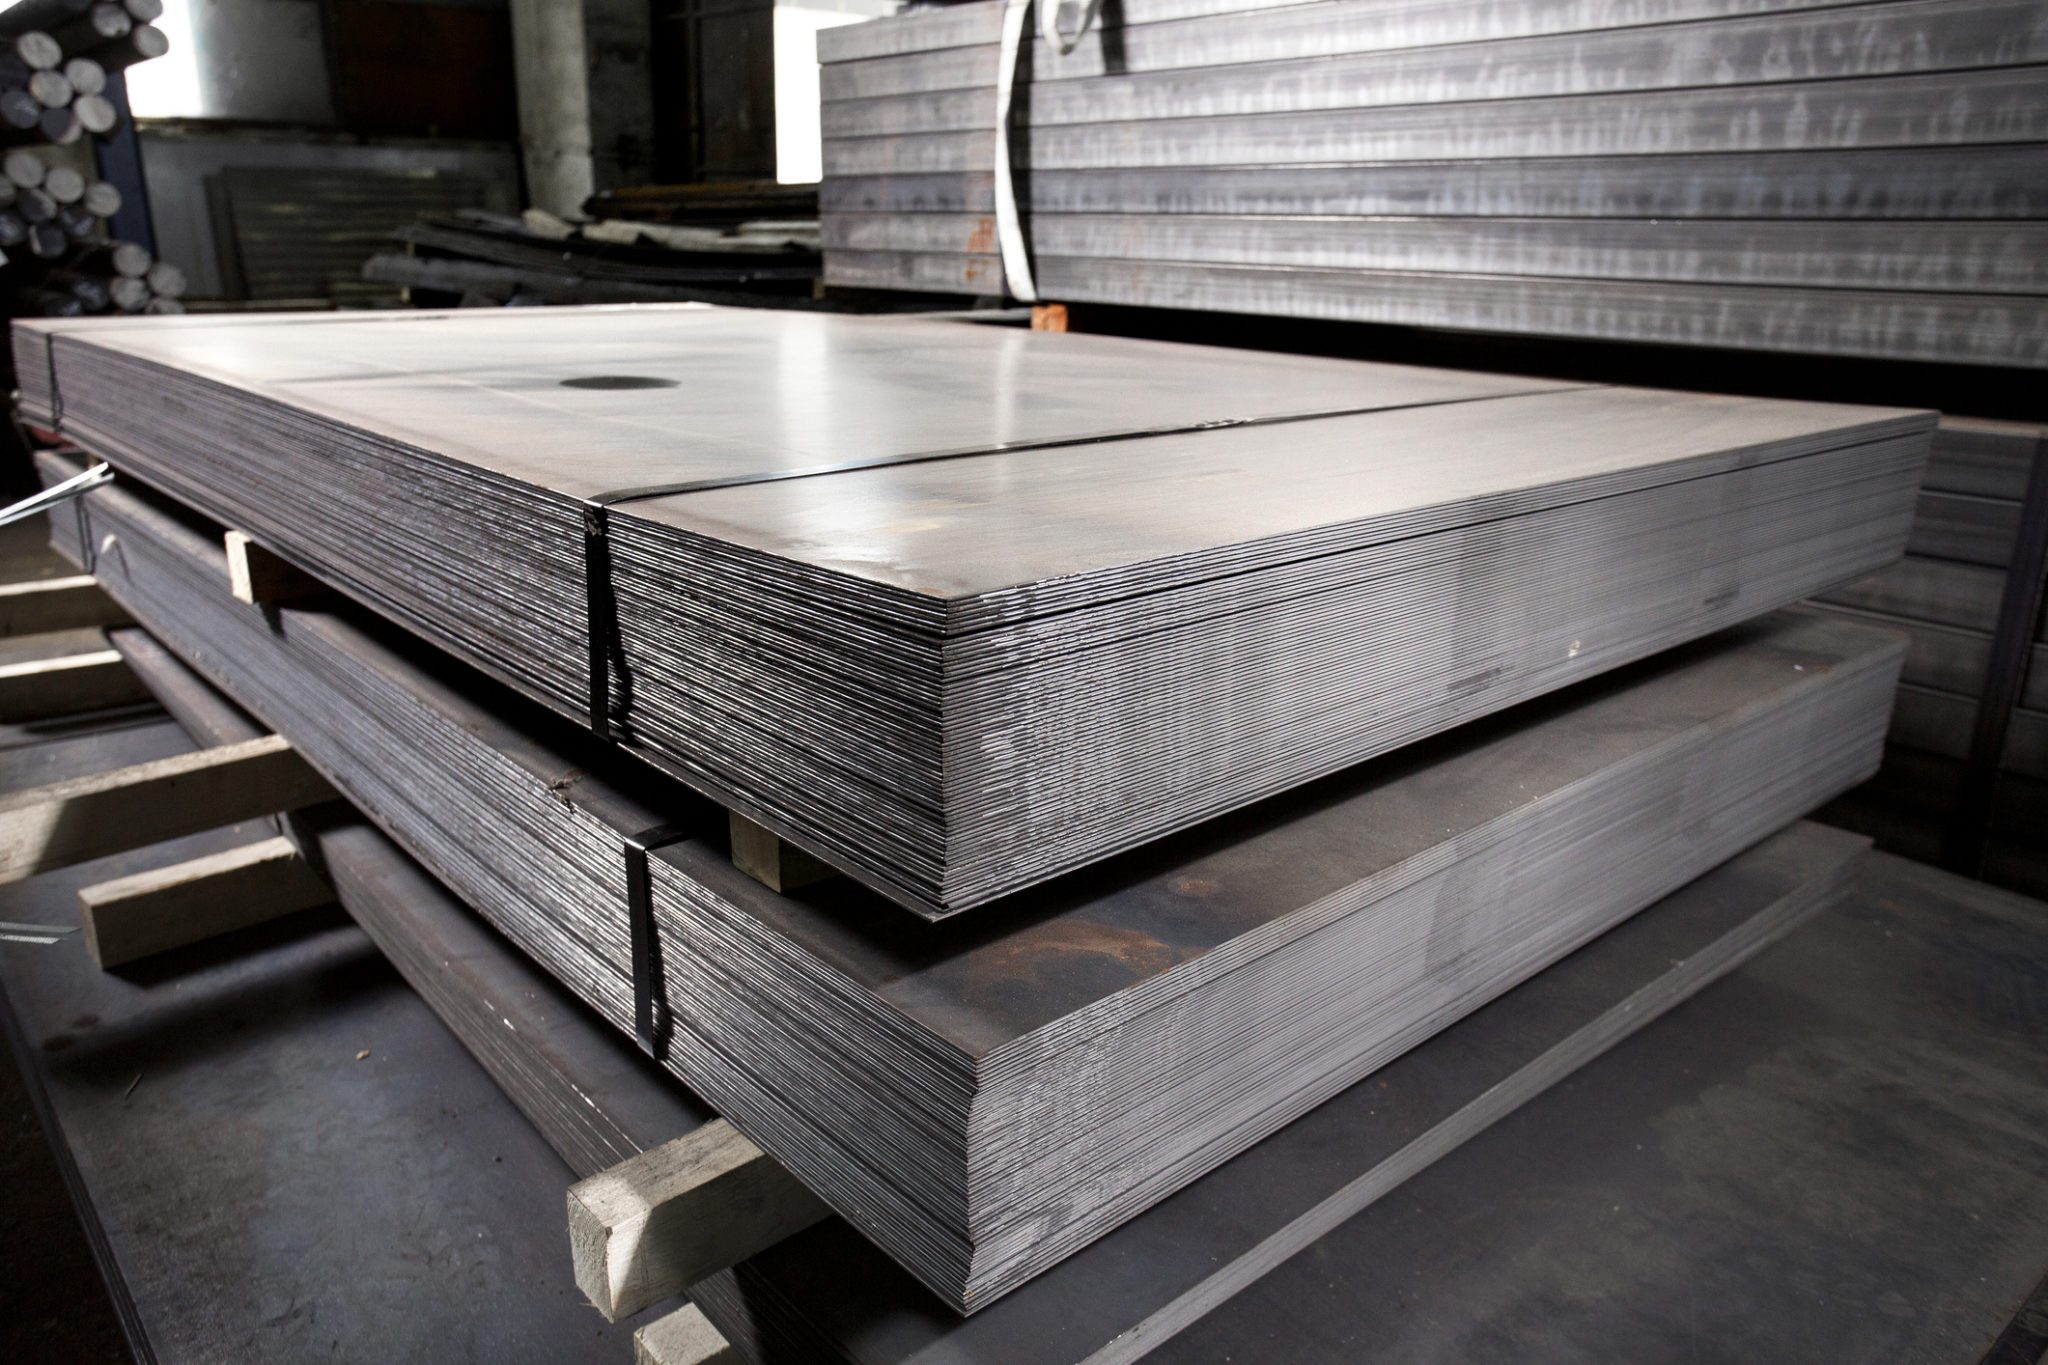 Steel or Stainless: What is the Most Durable Sheet Metal?